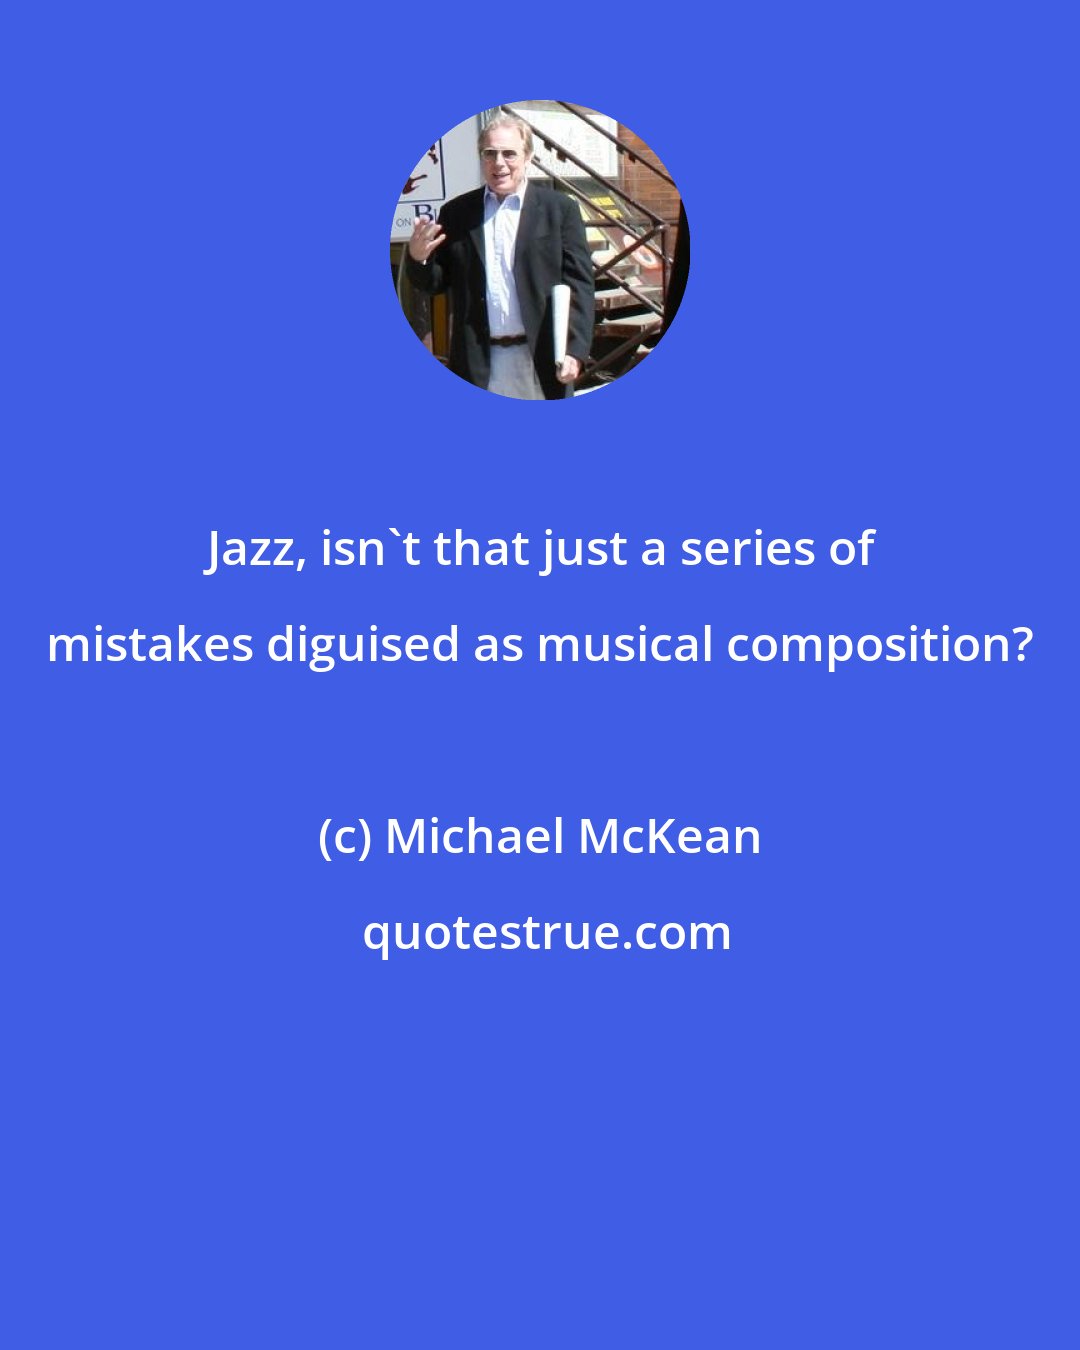 Michael McKean: Jazz, isn't that just a series of mistakes diguised as musical composition?